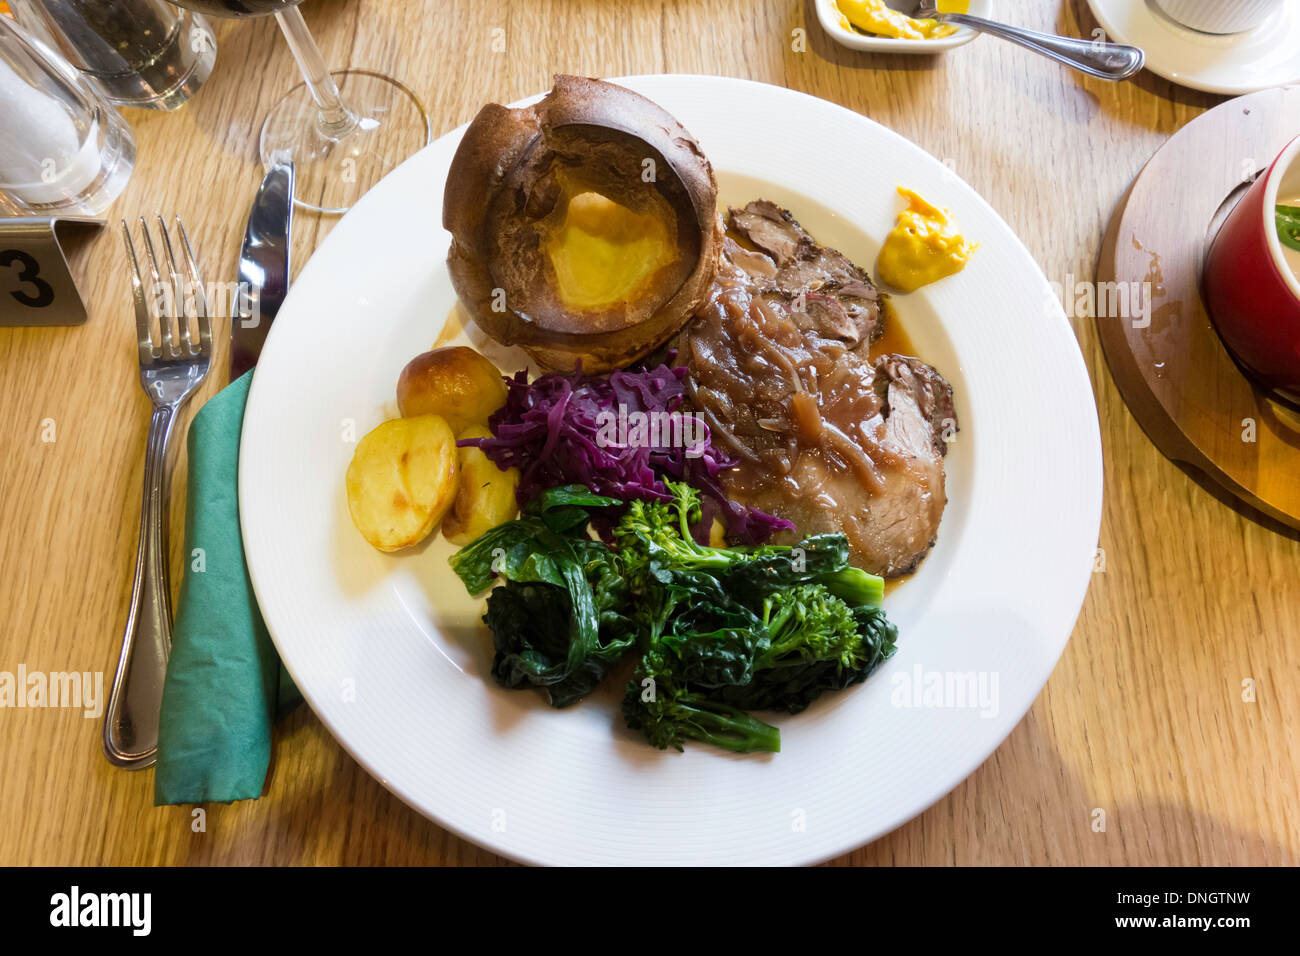 Sunday Lunch main course Roast Sirloin Beef Yorkshire pudding vegetables gravy and Mustard Stock Photo